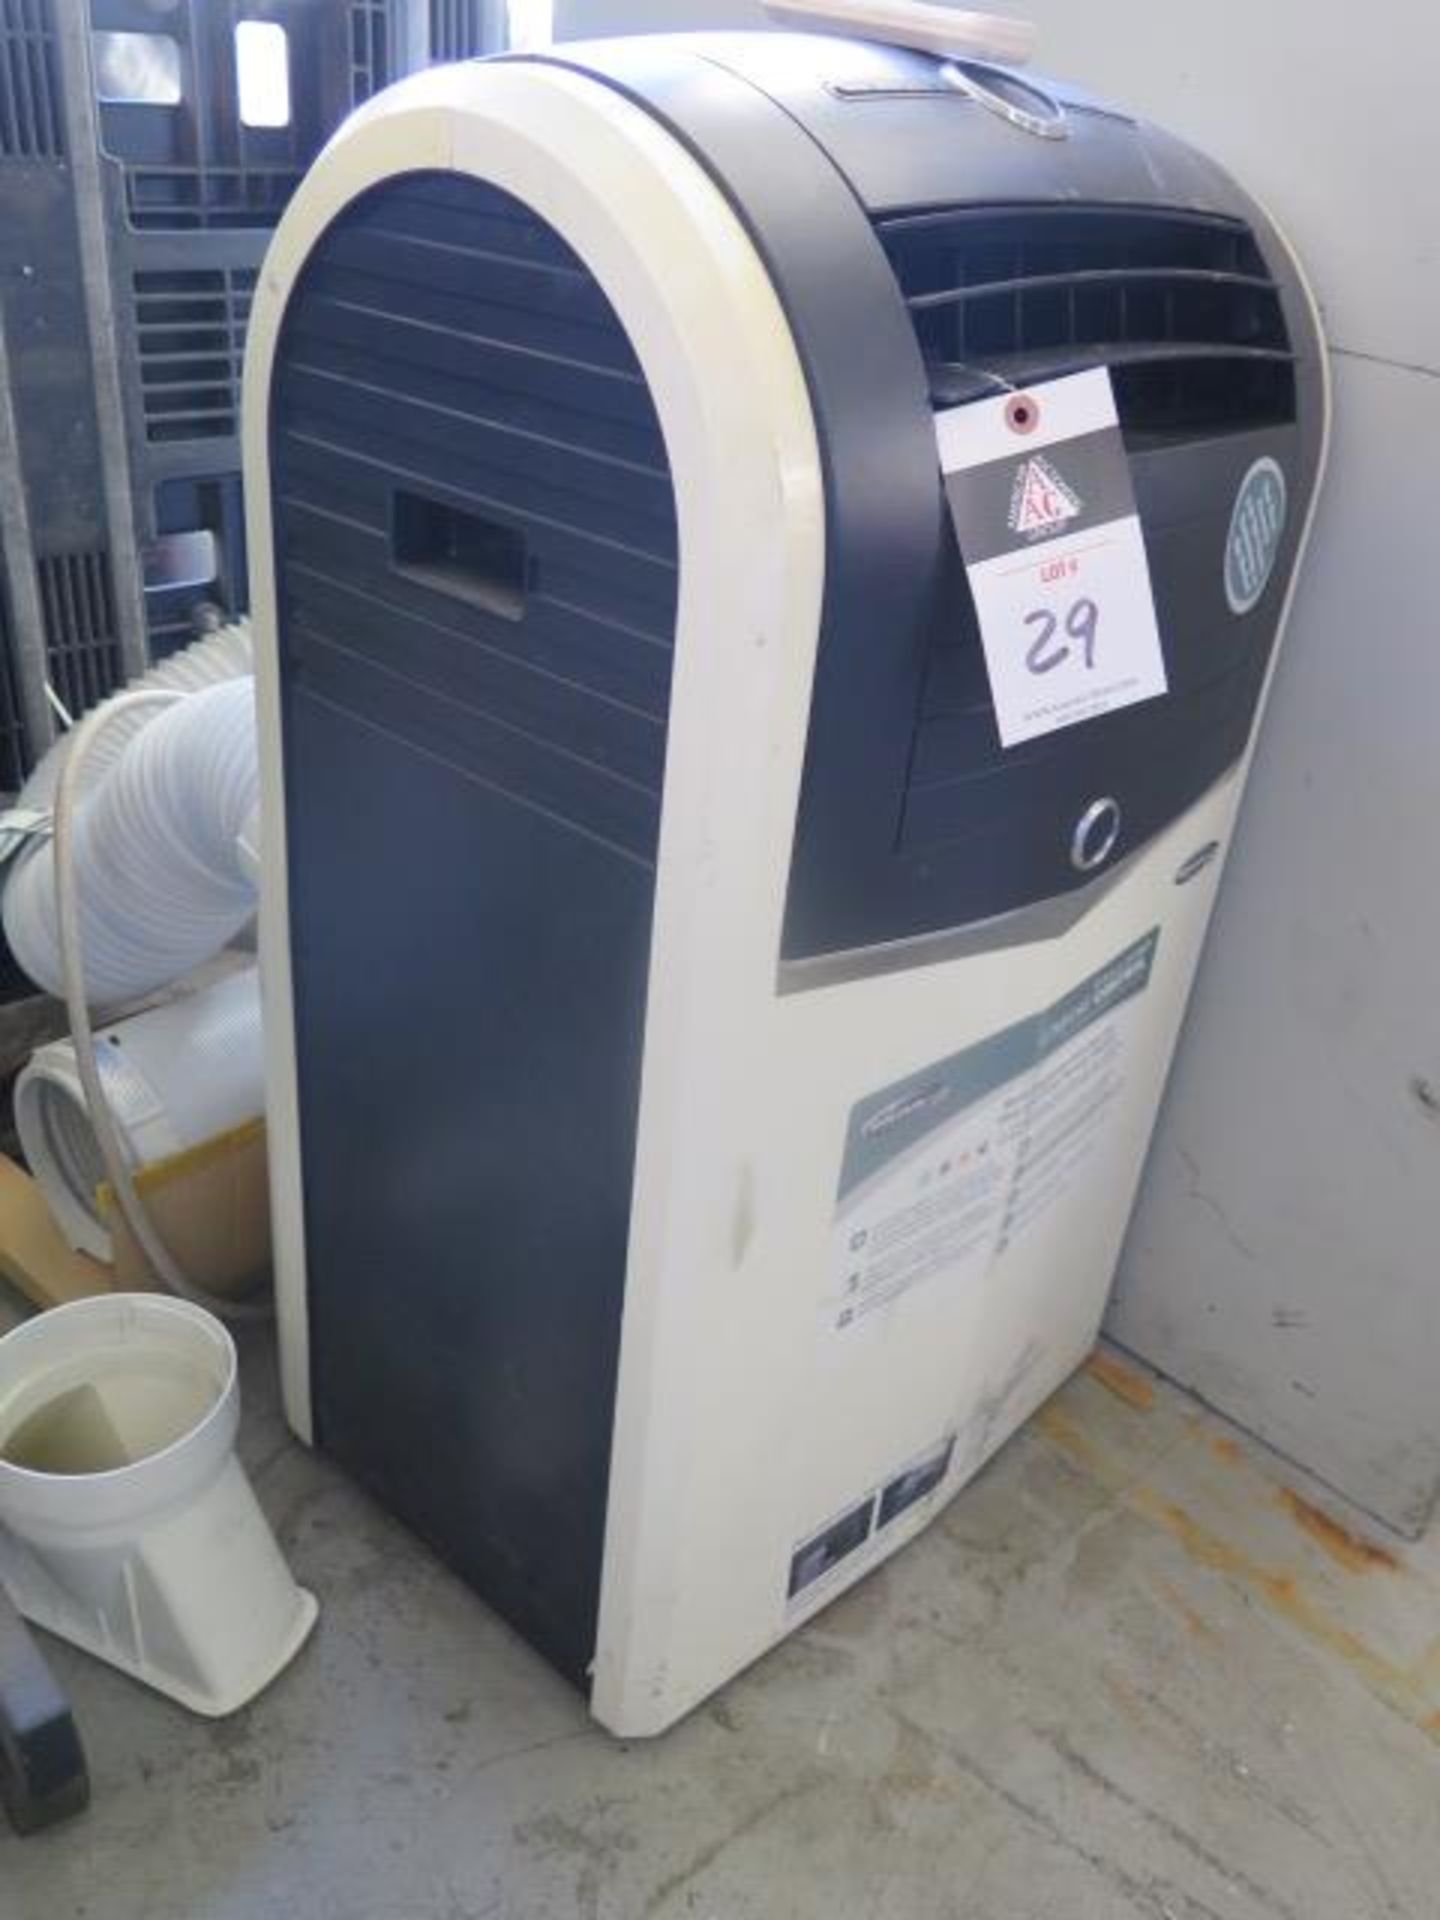 SoluseAie Portable Air Conditioner (SOLD AS-IS - NO WARRANTY) - Image 4 of 6